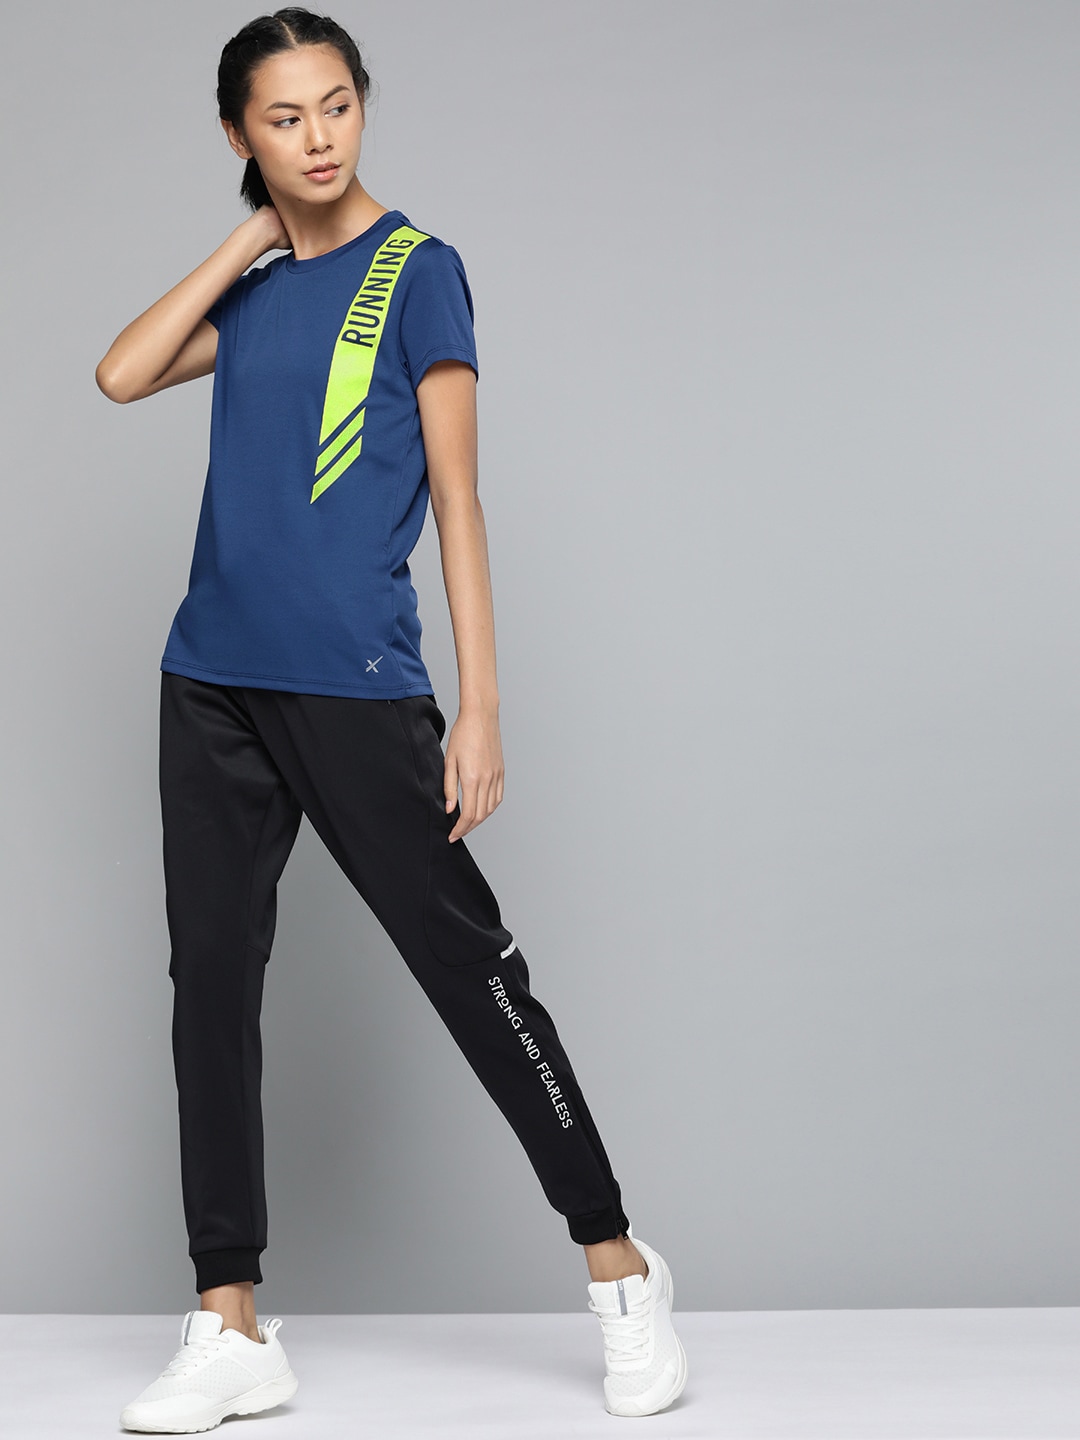 HRX By Hrithik Roshan Running Women Neon Lime & Navy Blue Rapid-Dry Solid Tshirts Price in India